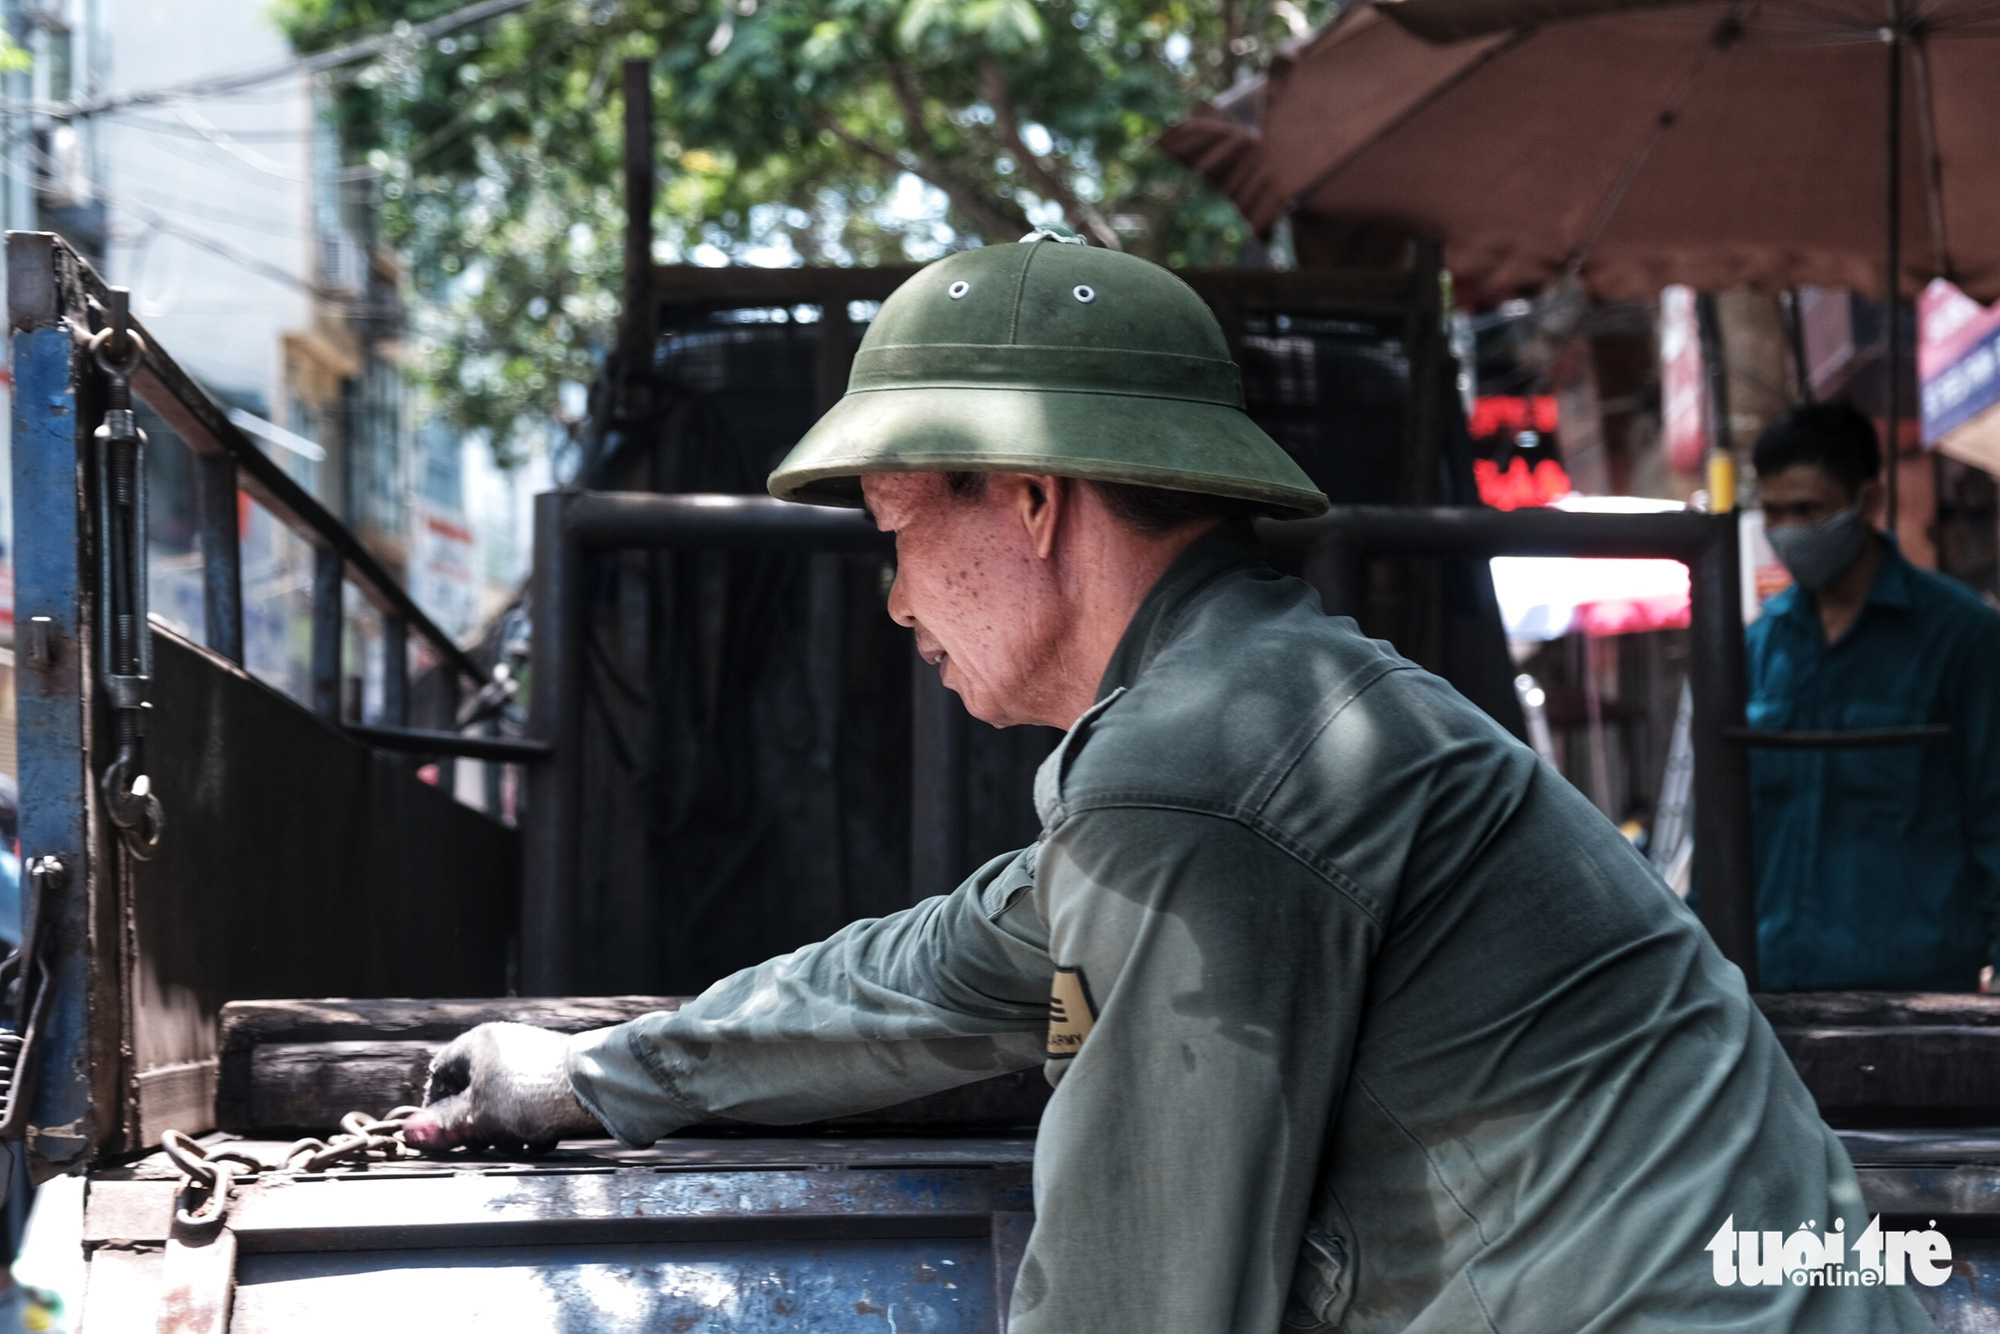 A porter works with a sweaty shirt due to high temperatures in Hanoi, June 23, 2020. Photo: Mai Thuong / Tuoi Tre